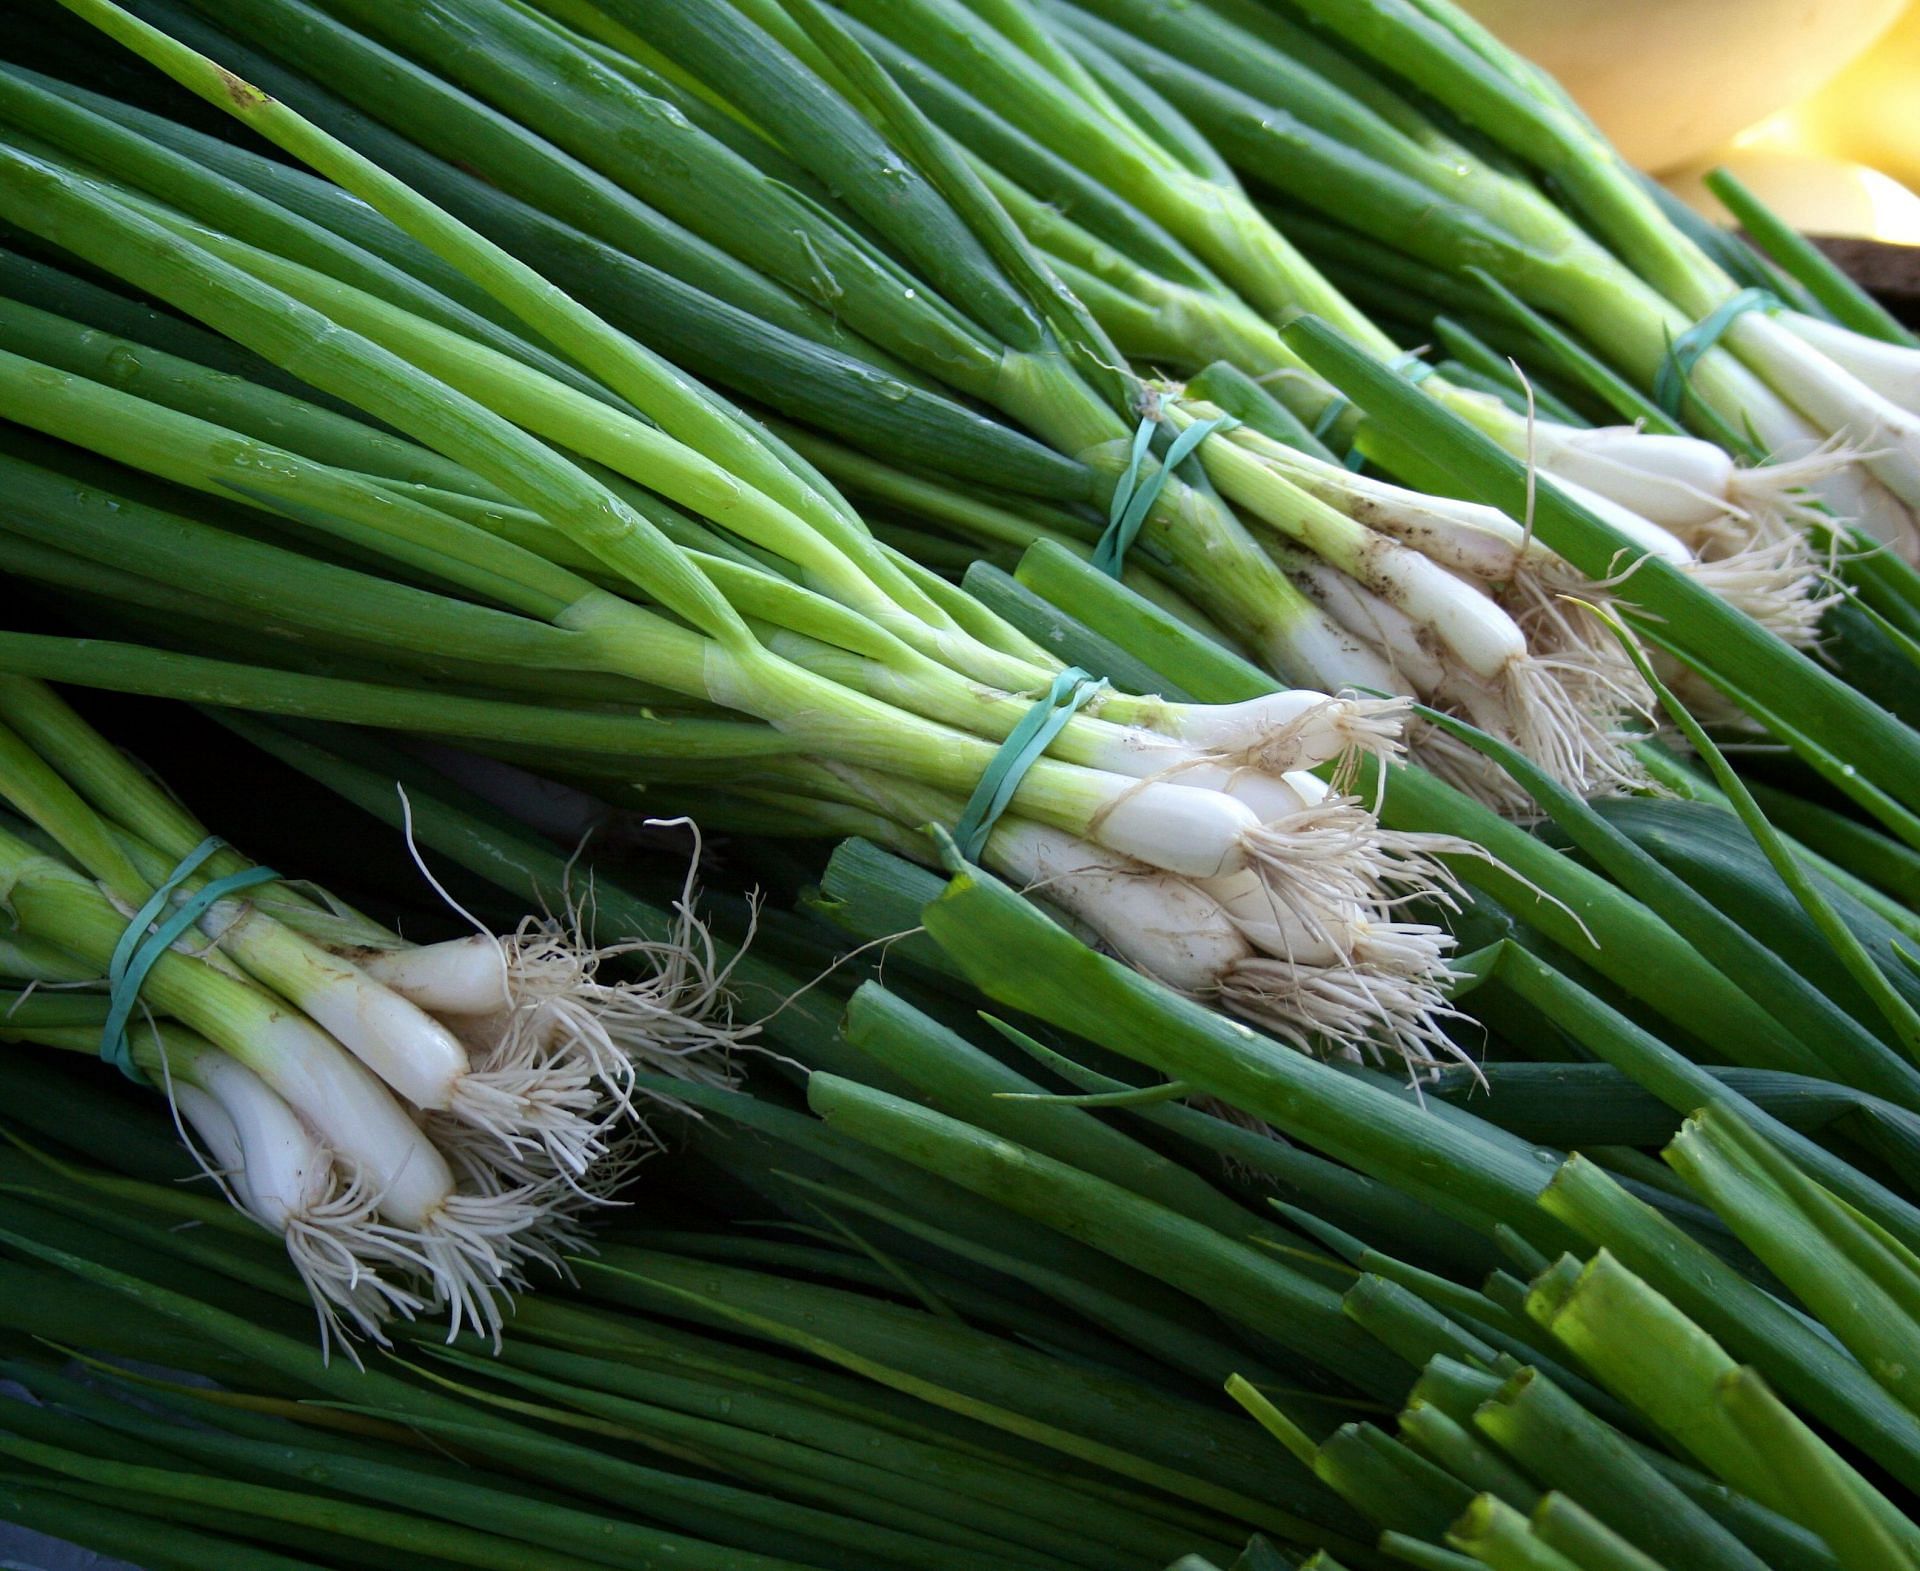 Scallions are young green onions (Image via Unsplash/Christopher Previte)